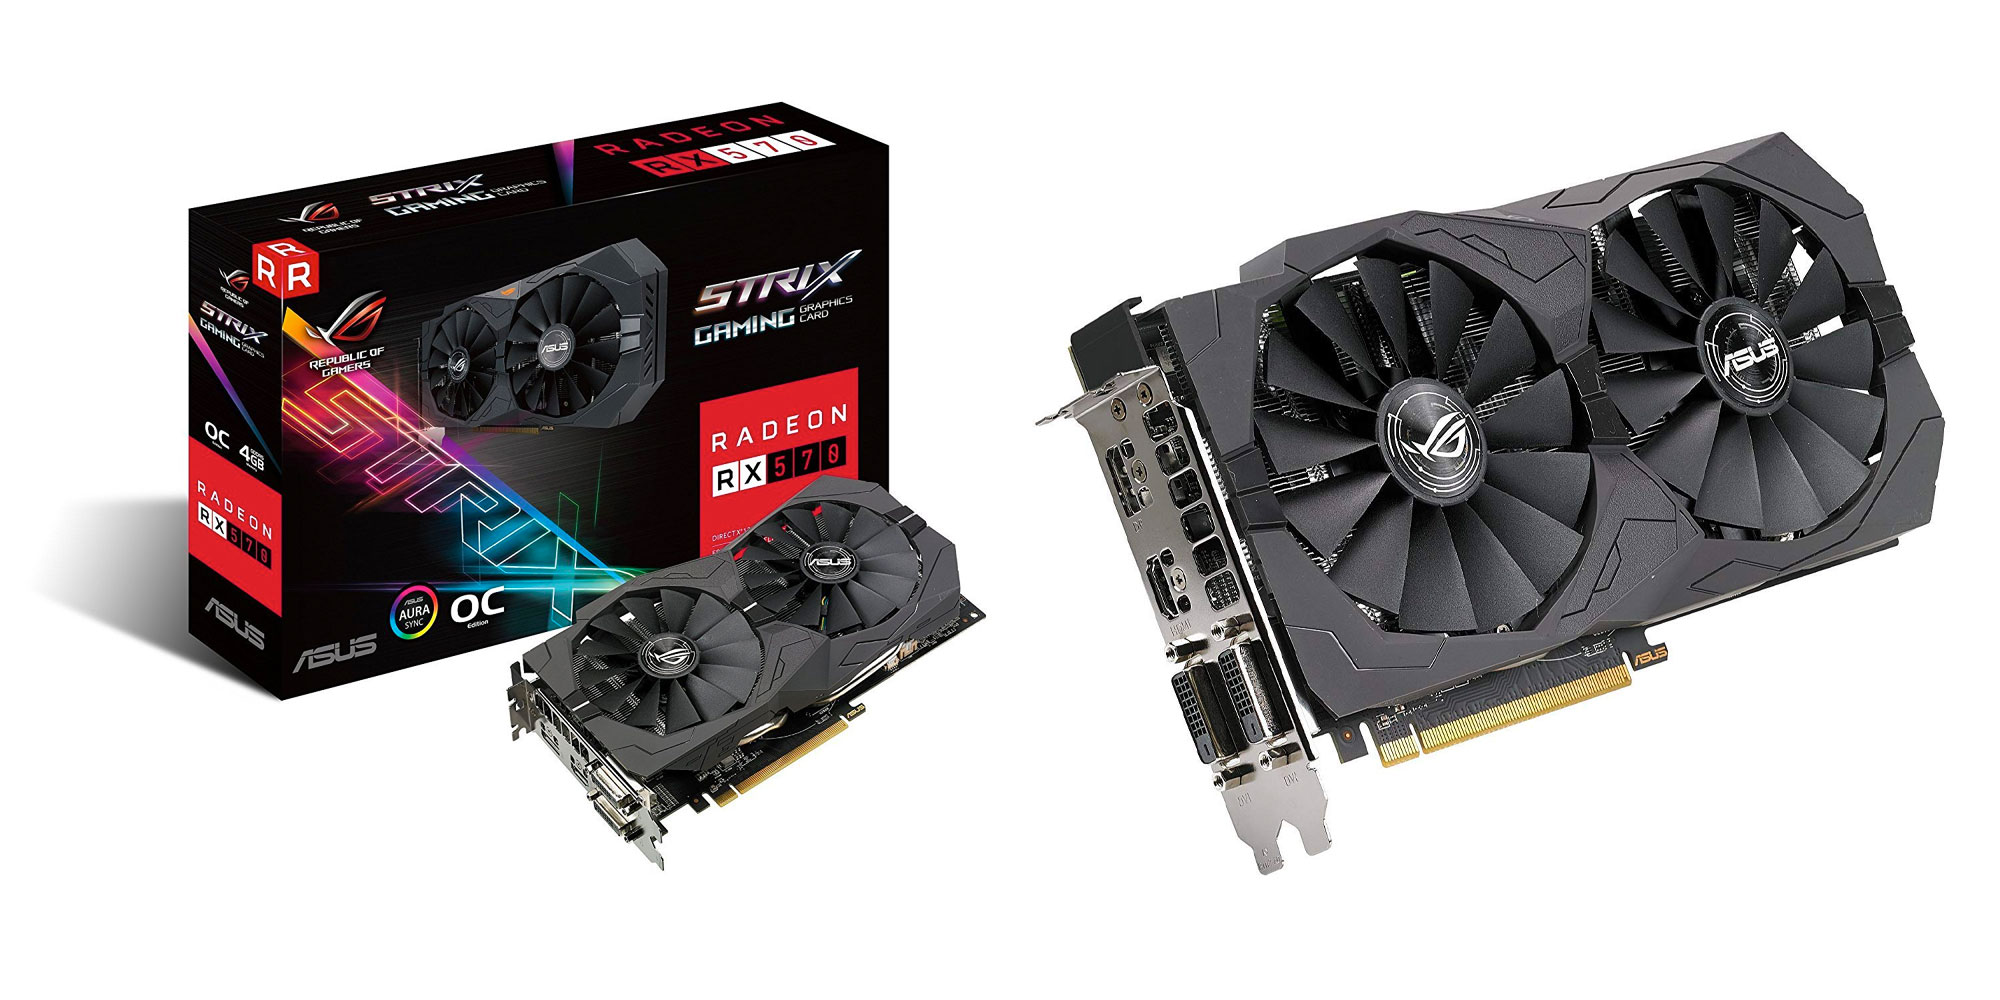 The ASUS ROG Strix RX 570 is perfect for budget-focused gaming setups